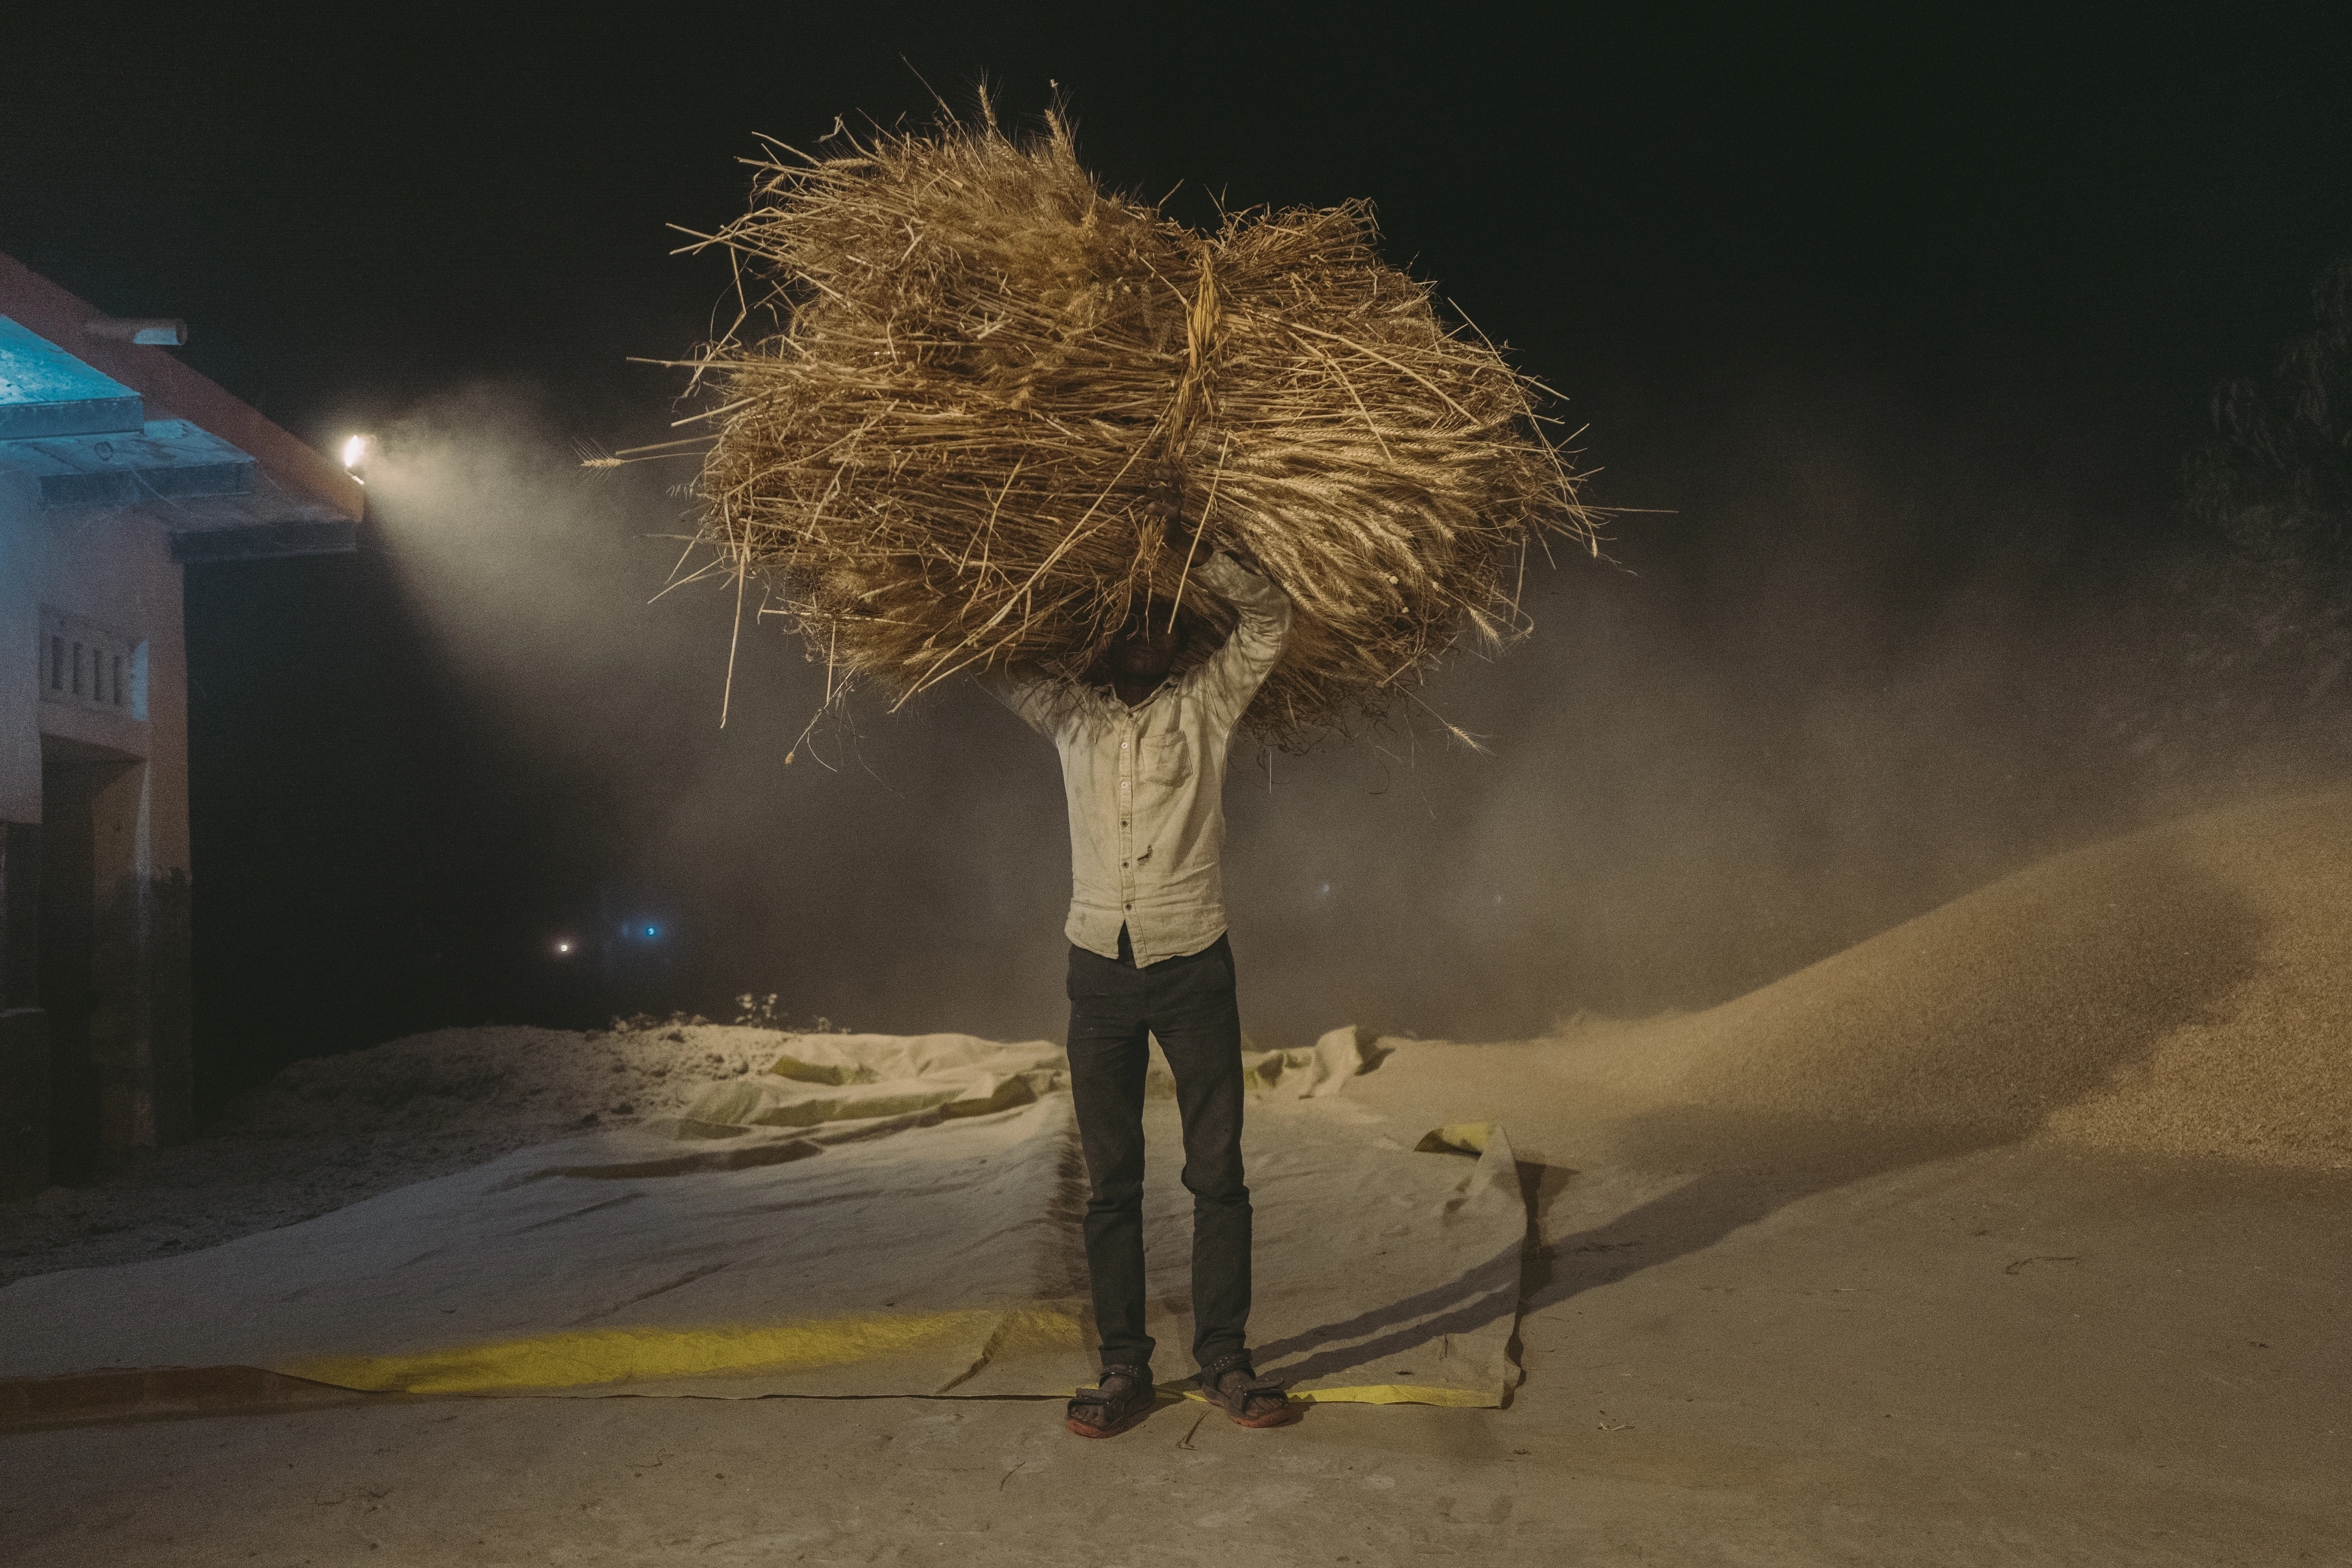 portrait of a man holding a large bale of hay over his head.